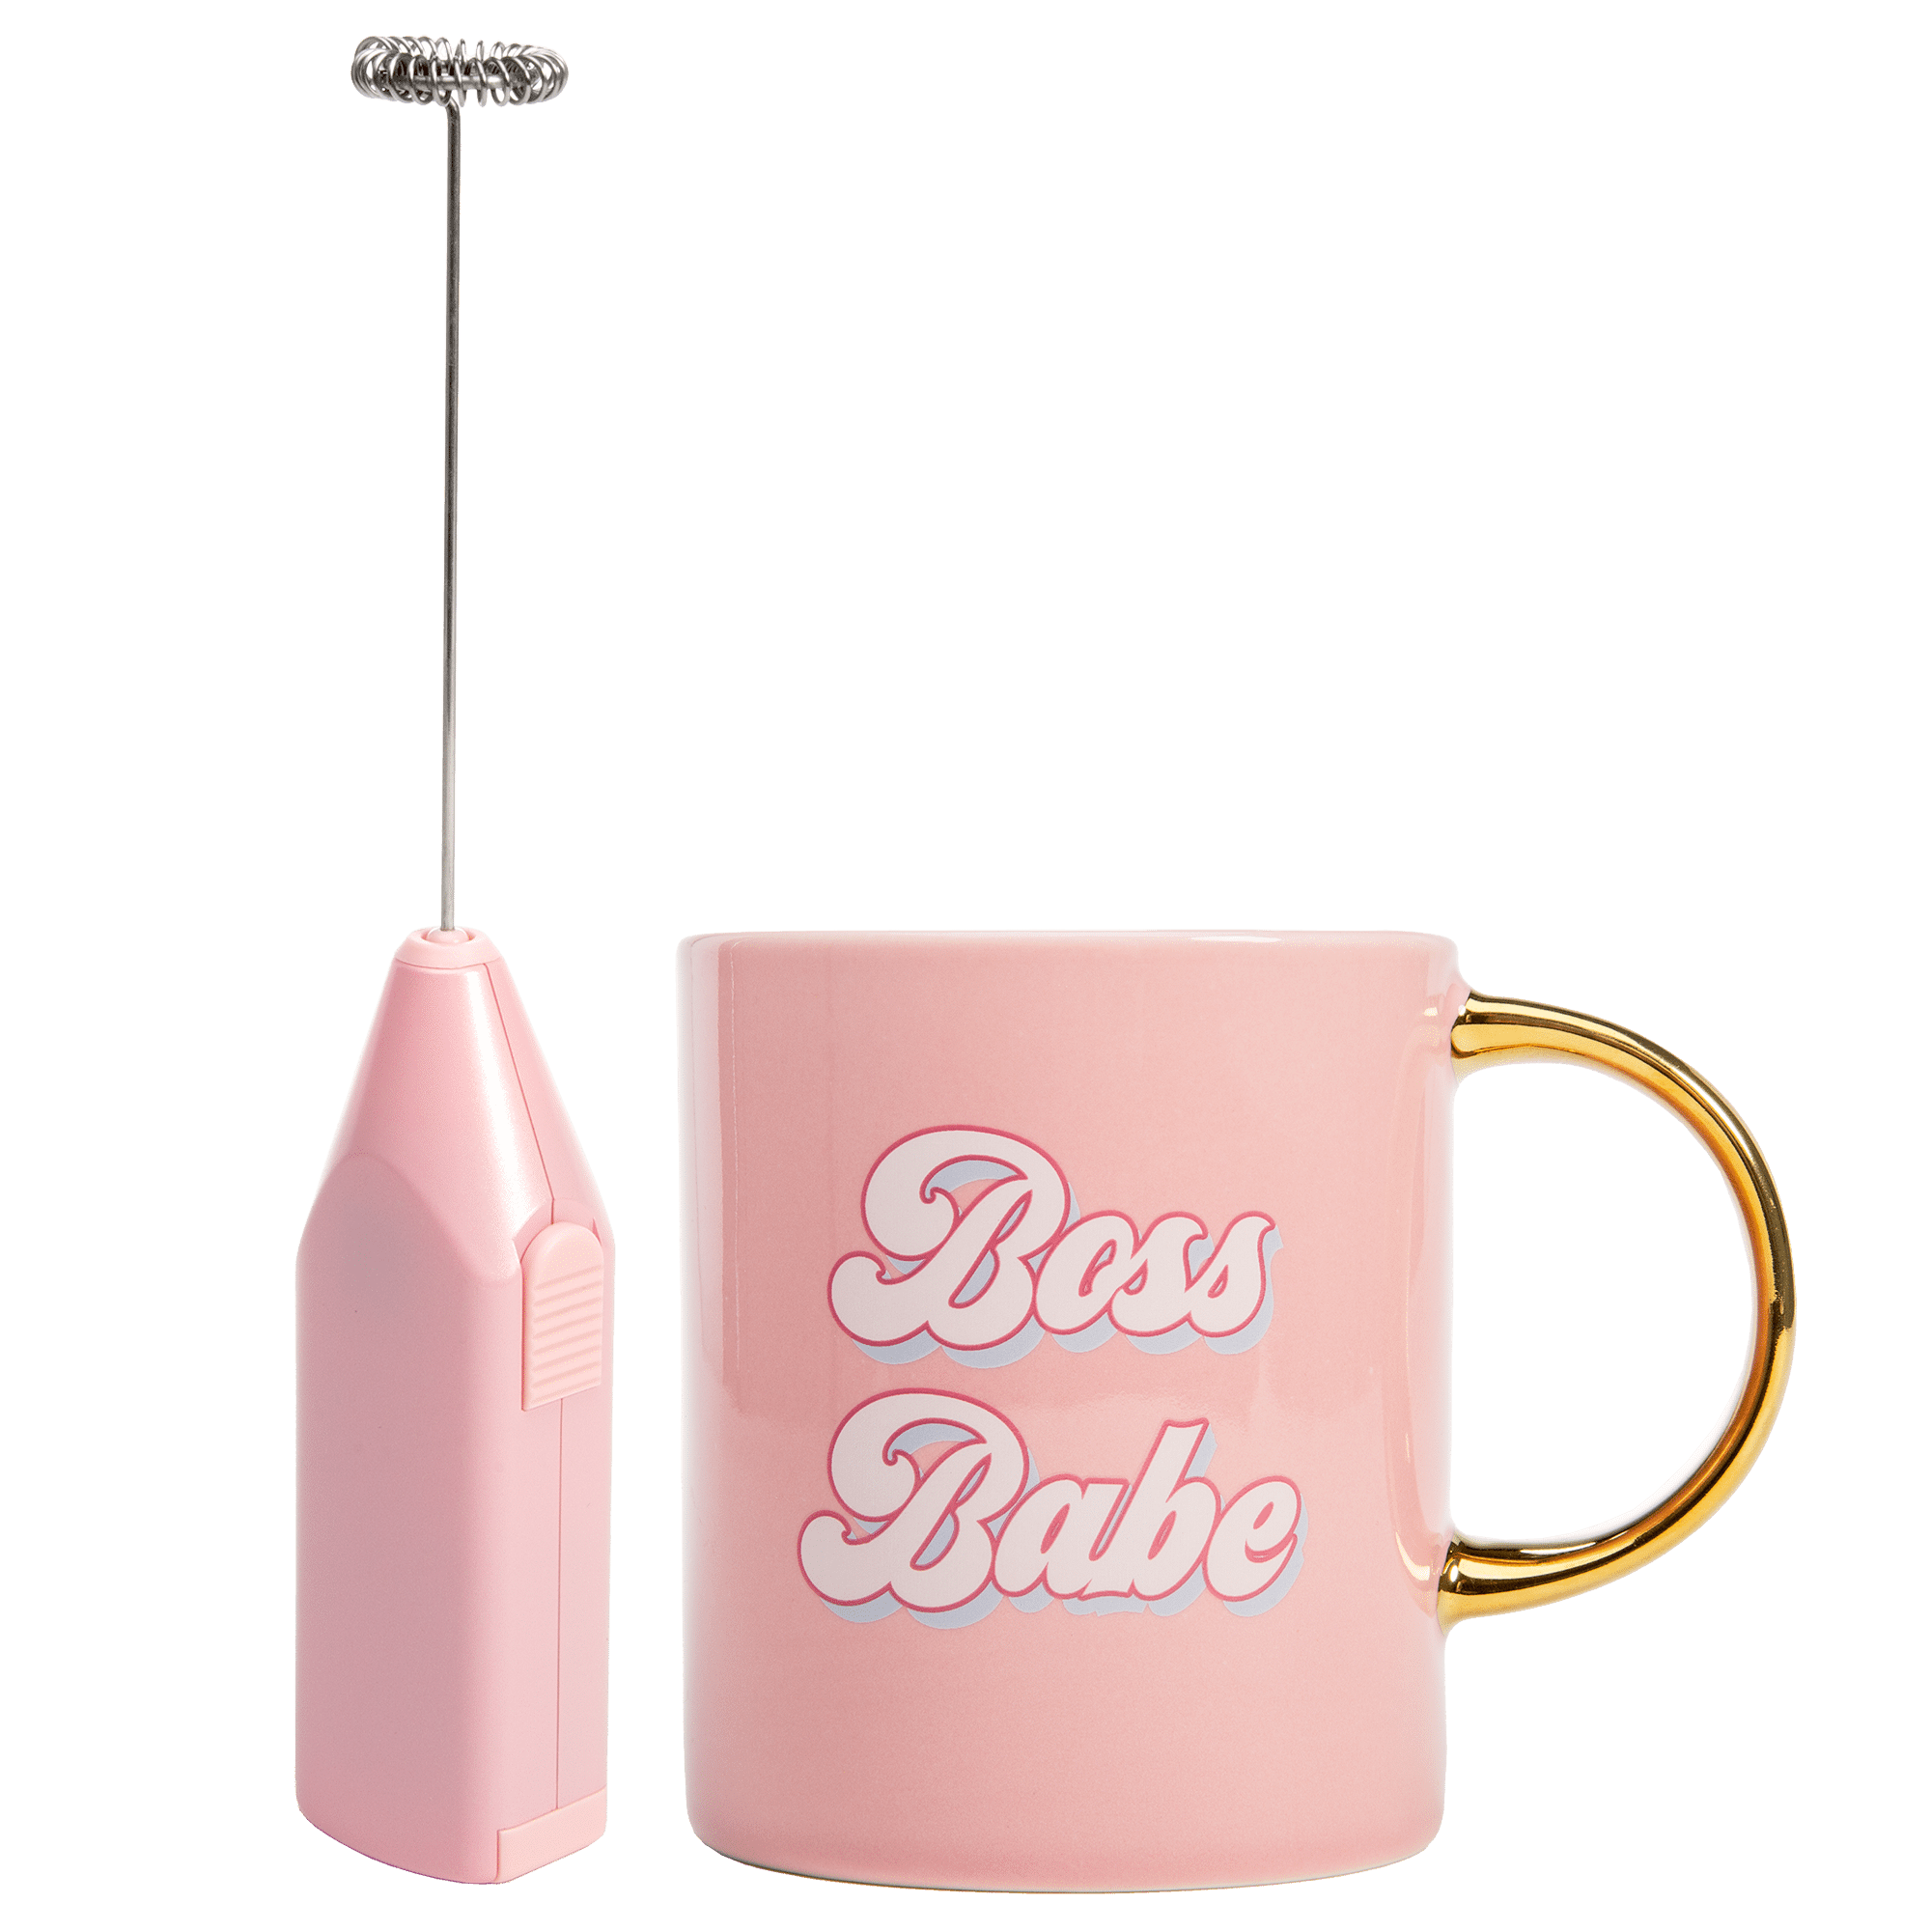 Paris Hilton Boss Babe 16oz Ceramic Coffee Mug and Electric Milk Frother  Set - Battery Powered, 2-Pieces, Pink